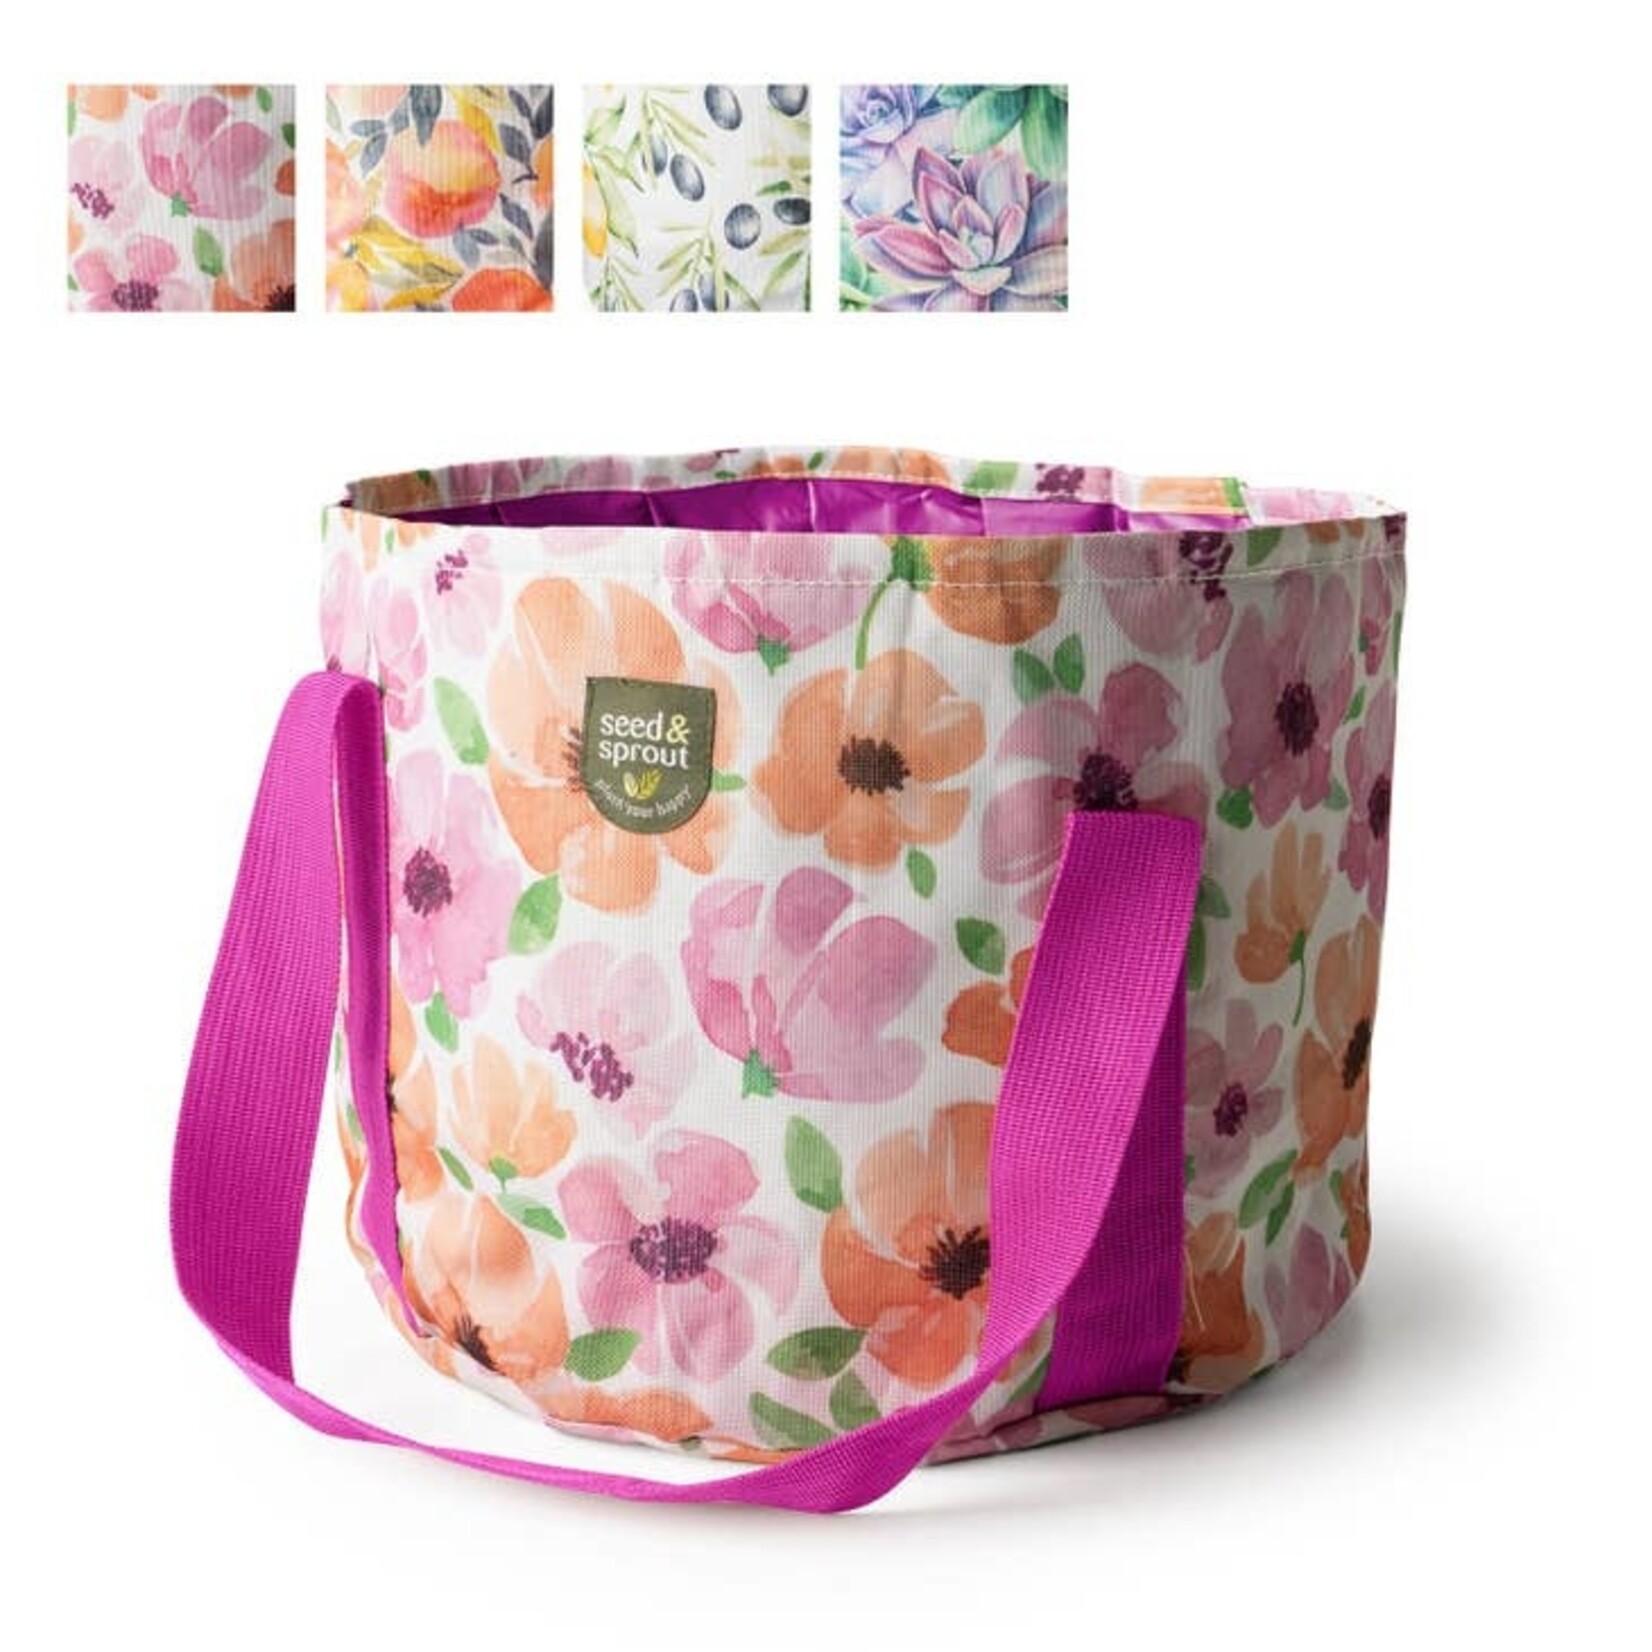 DMerch Seed & Sprout Foldable Garden Bucket